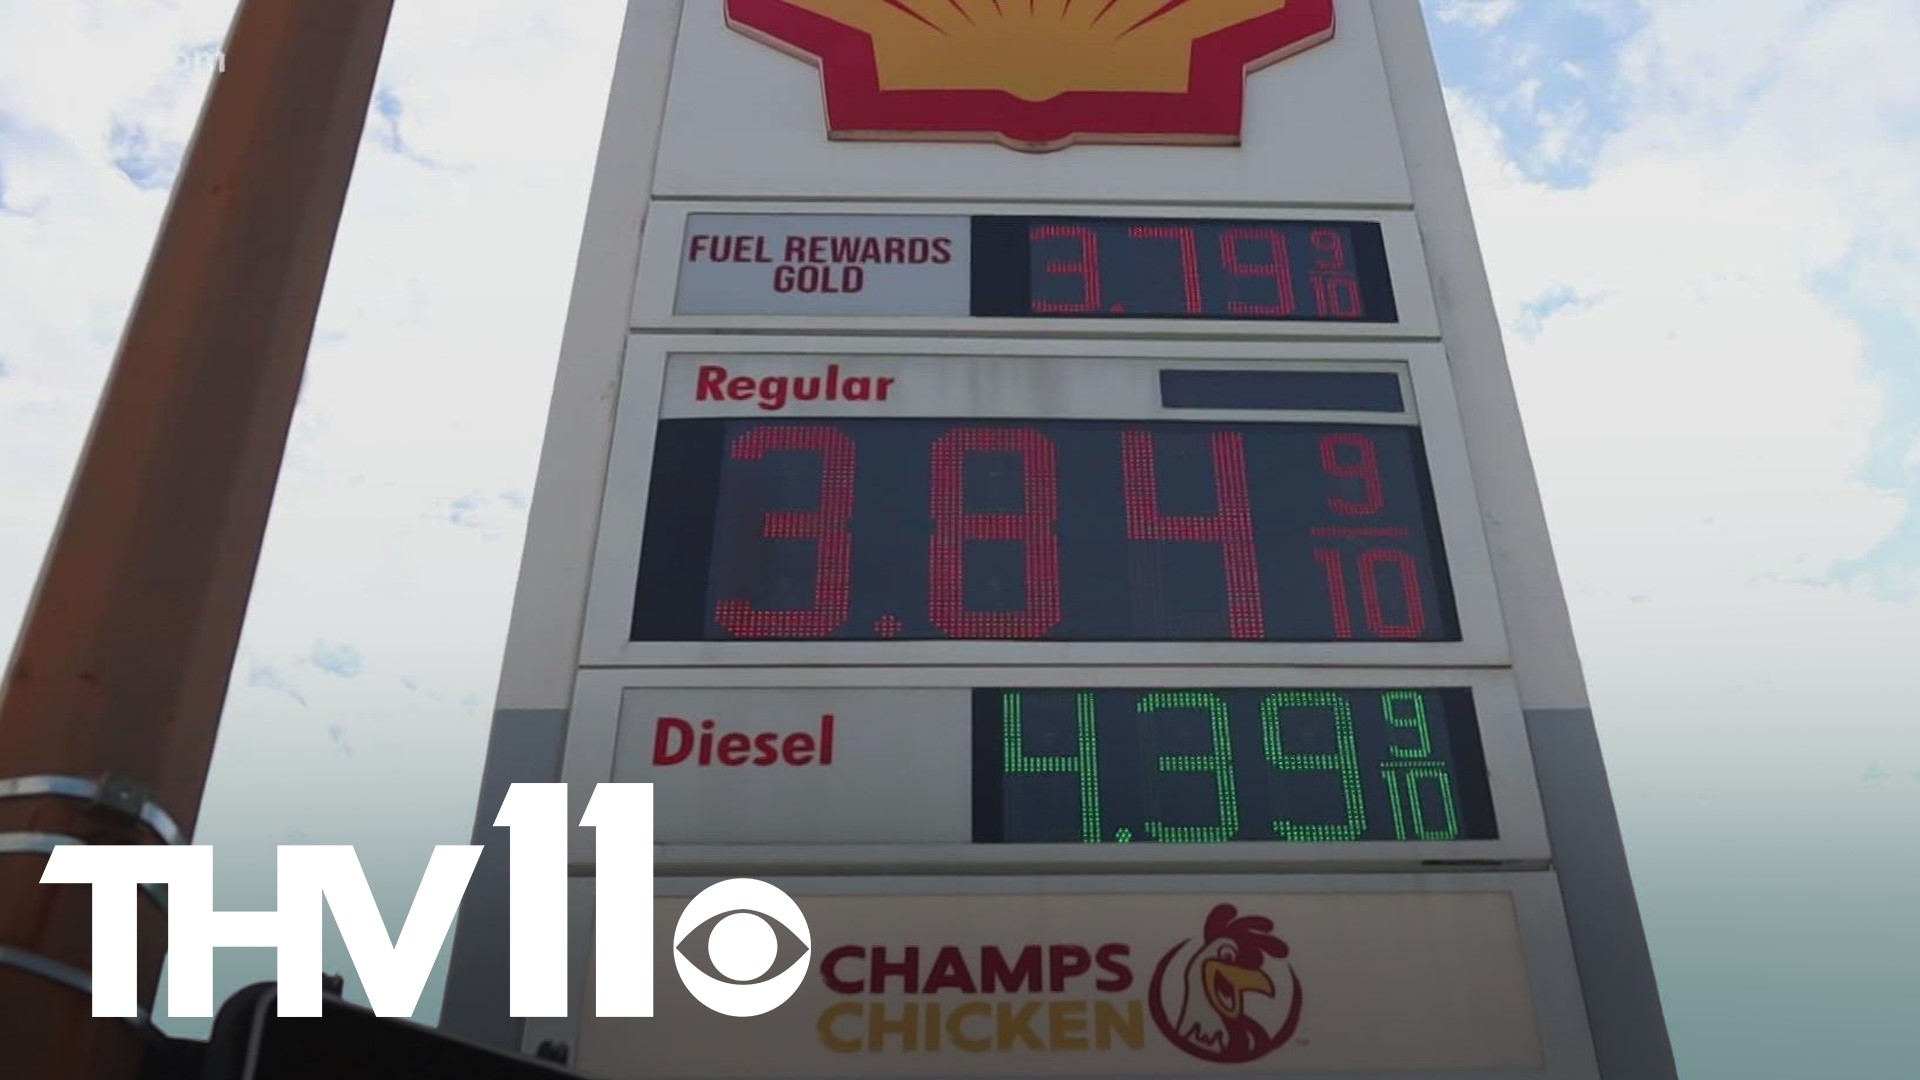 Sarah Horbacewicz talked to people getting gas and experts about the rising gas prices and what we can expect in the future.